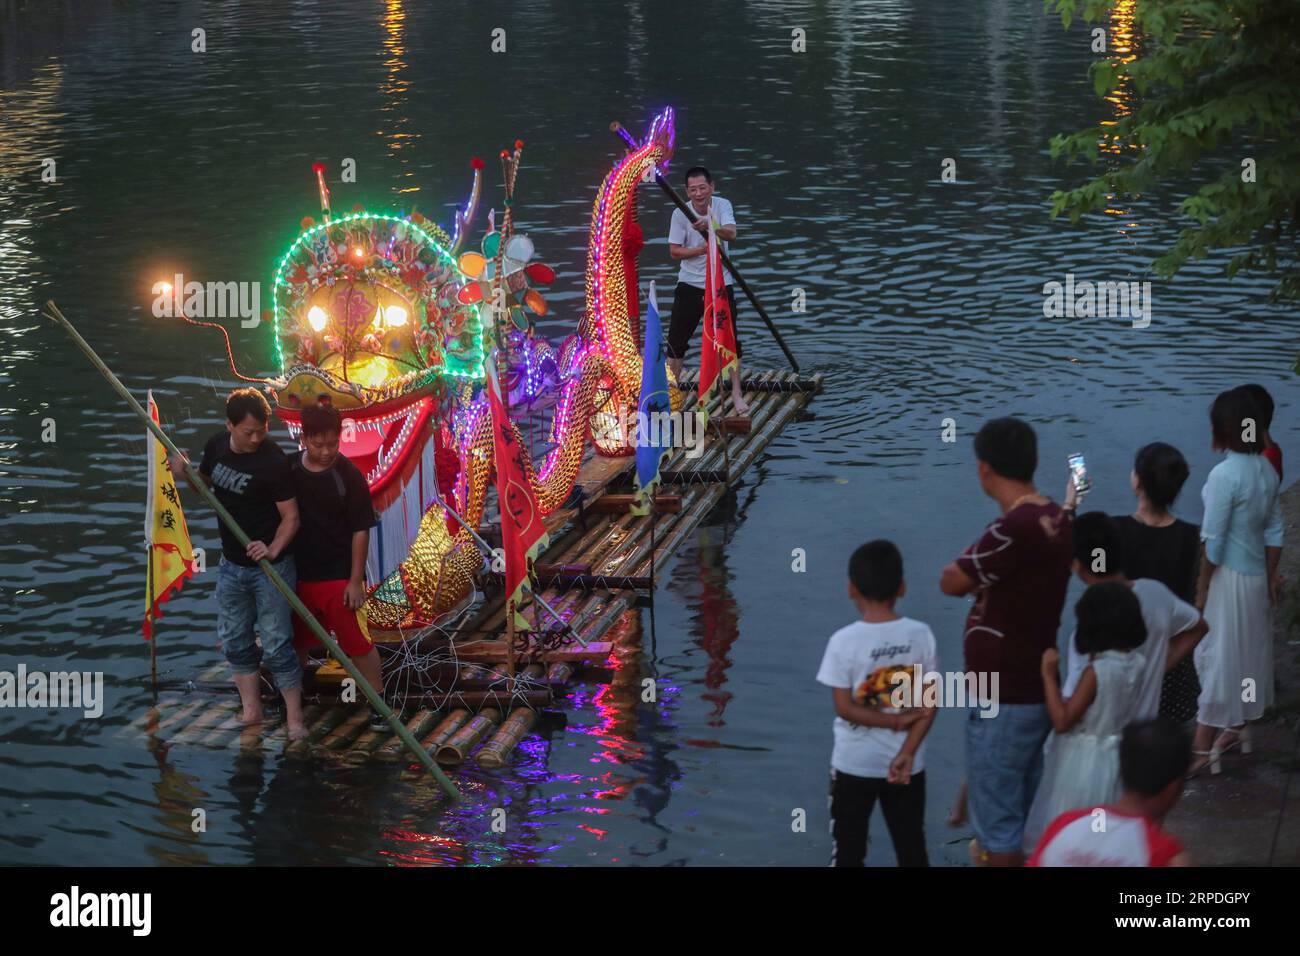 (190804) -- HANGZHOU, Aug. 4, 2019 -- People enjoy dragon lantern during the coolness party in Changlyu Town, Hangzhou City of east China s Zhejiang Province, Aug. 3, 2019. A coolness party was held here in Changlyu Town on Saturday, during which people could enjoy the coolness in summer through various activities such as evening gala, fruit picking, basketball game and handicrafts making. ) CHINA-ZHEJIANG-HANGZHOU-COOLNESS PARTY (CN) XuxYu PUBLICATIONxNOTxINxCHN Stock Photo